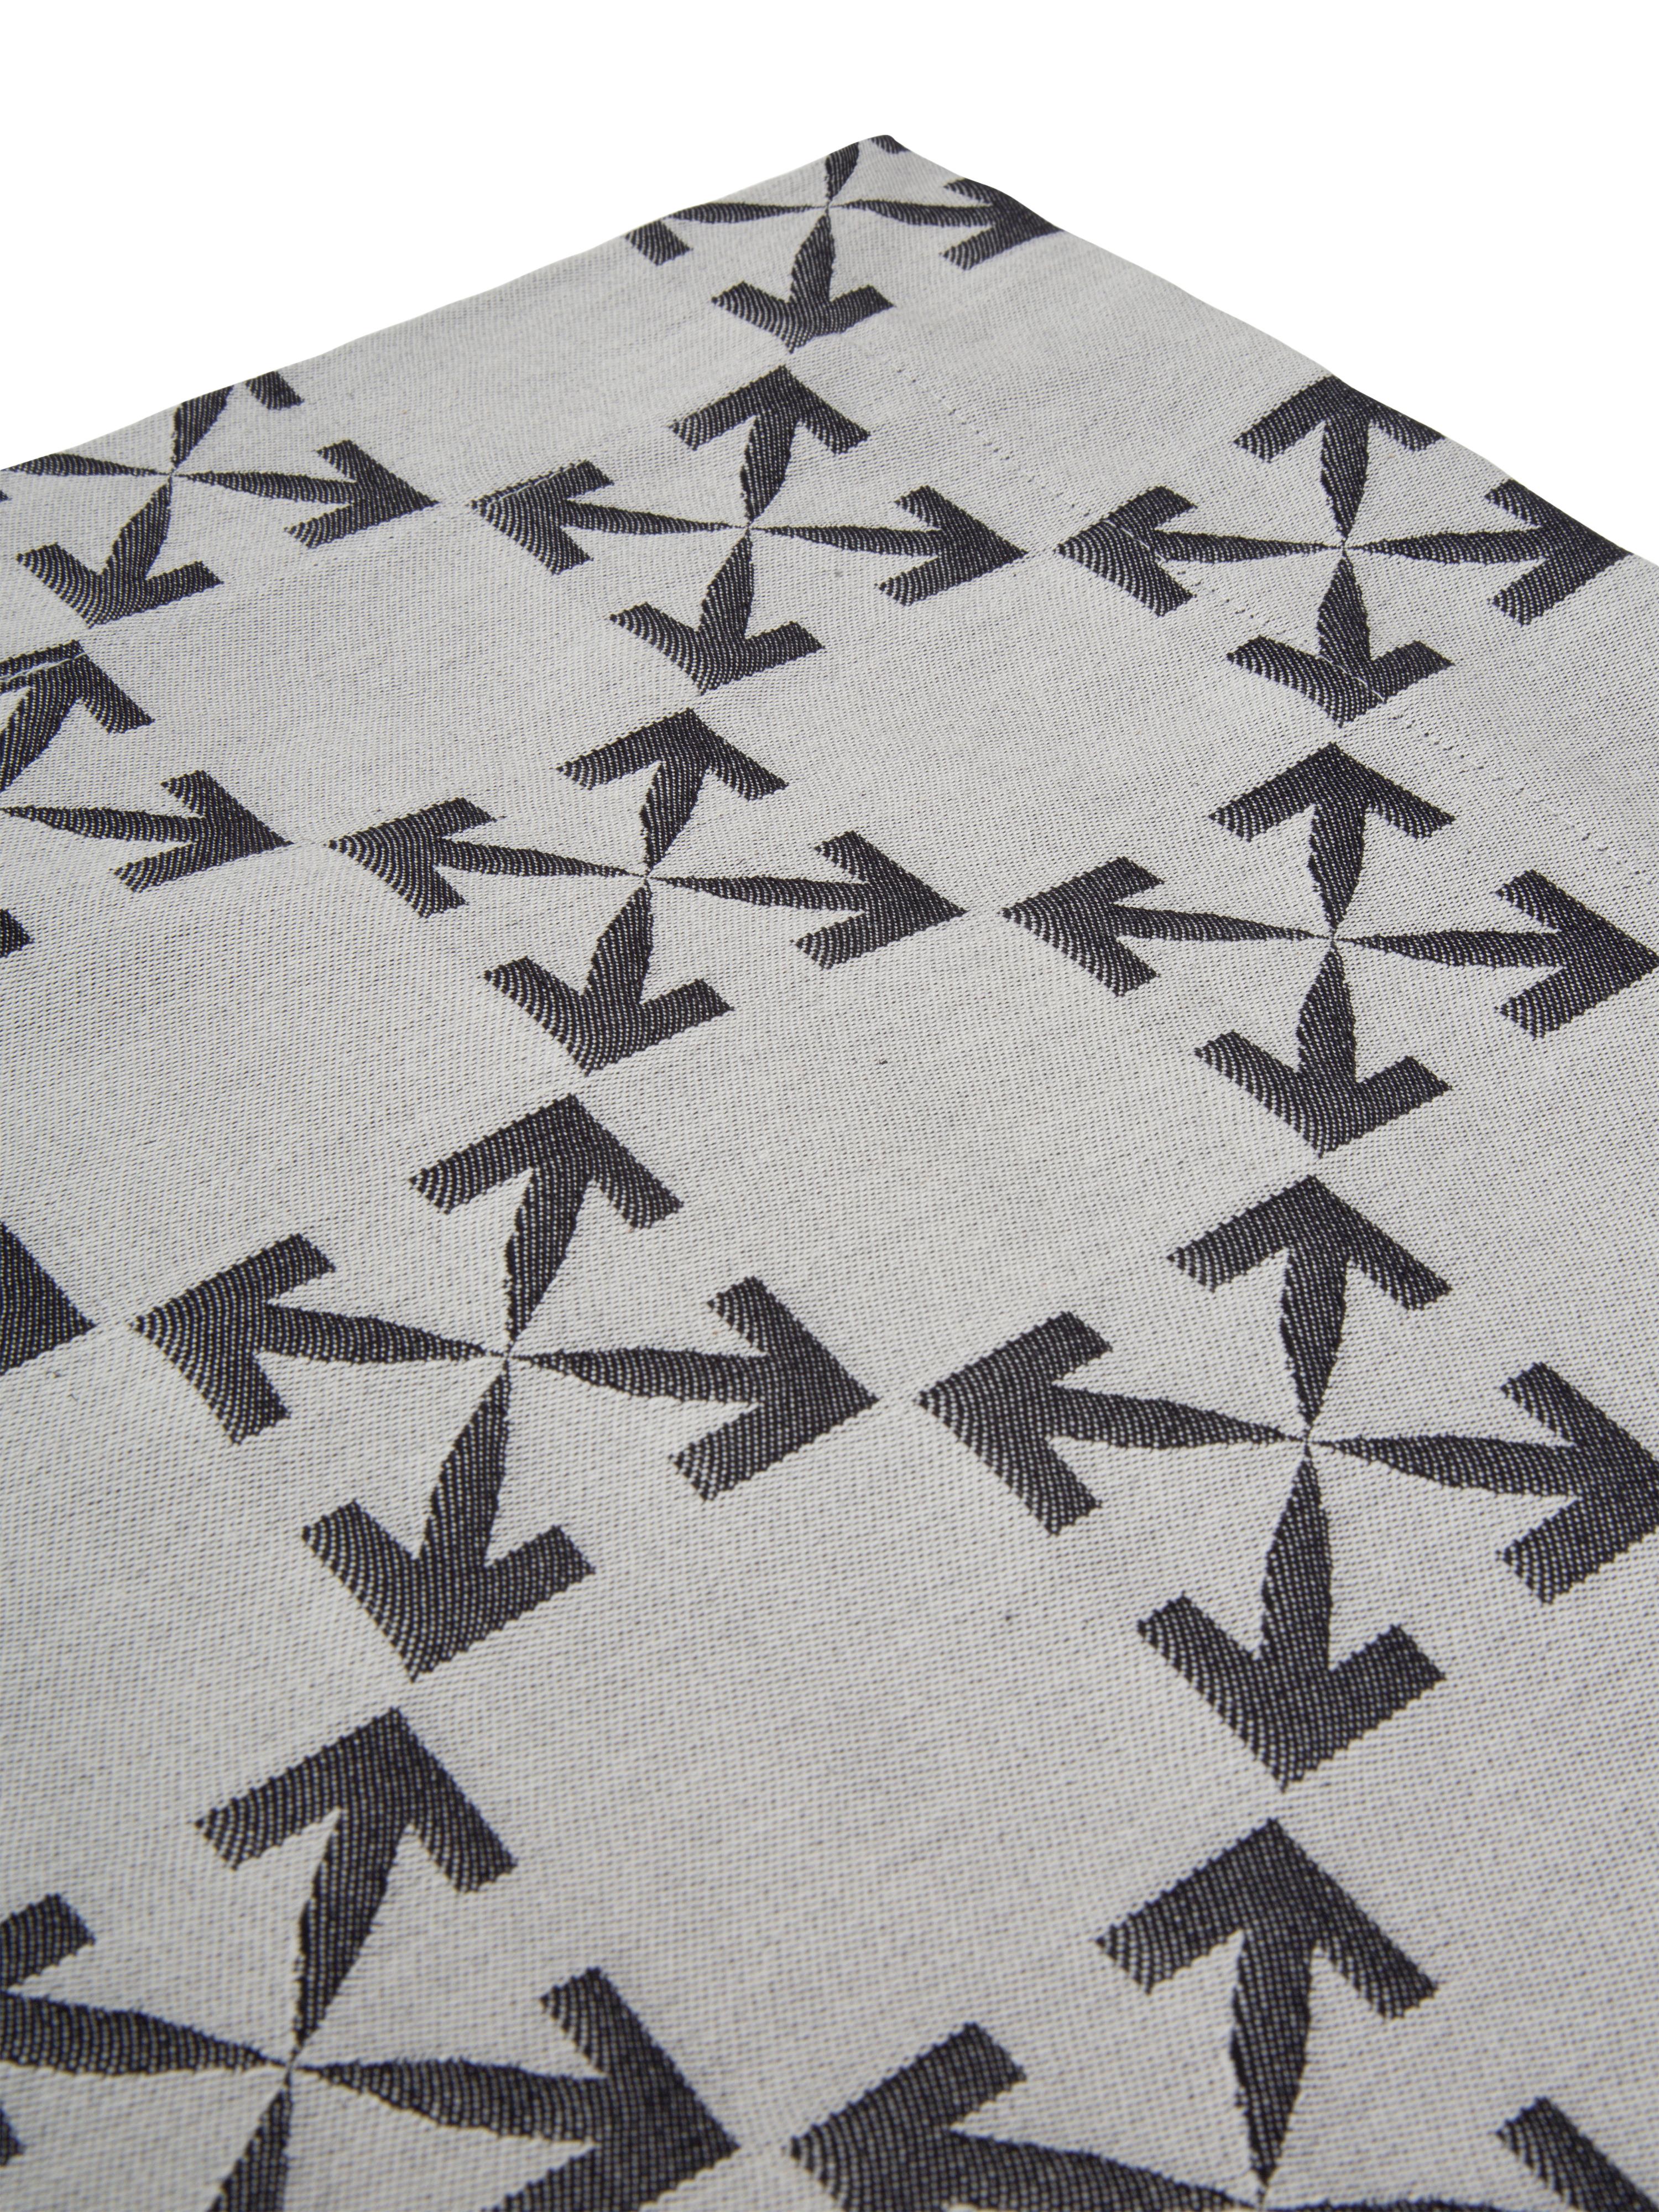 Kitchen textiles in Taupe and Black colors, with Arrow pattern in jacquard. HOME Orange Tyvec label on a side
By Virgil Abloh
Dimensions: 145 W x 240 H
This item is only available to be purchased and shipped to the United States.
  